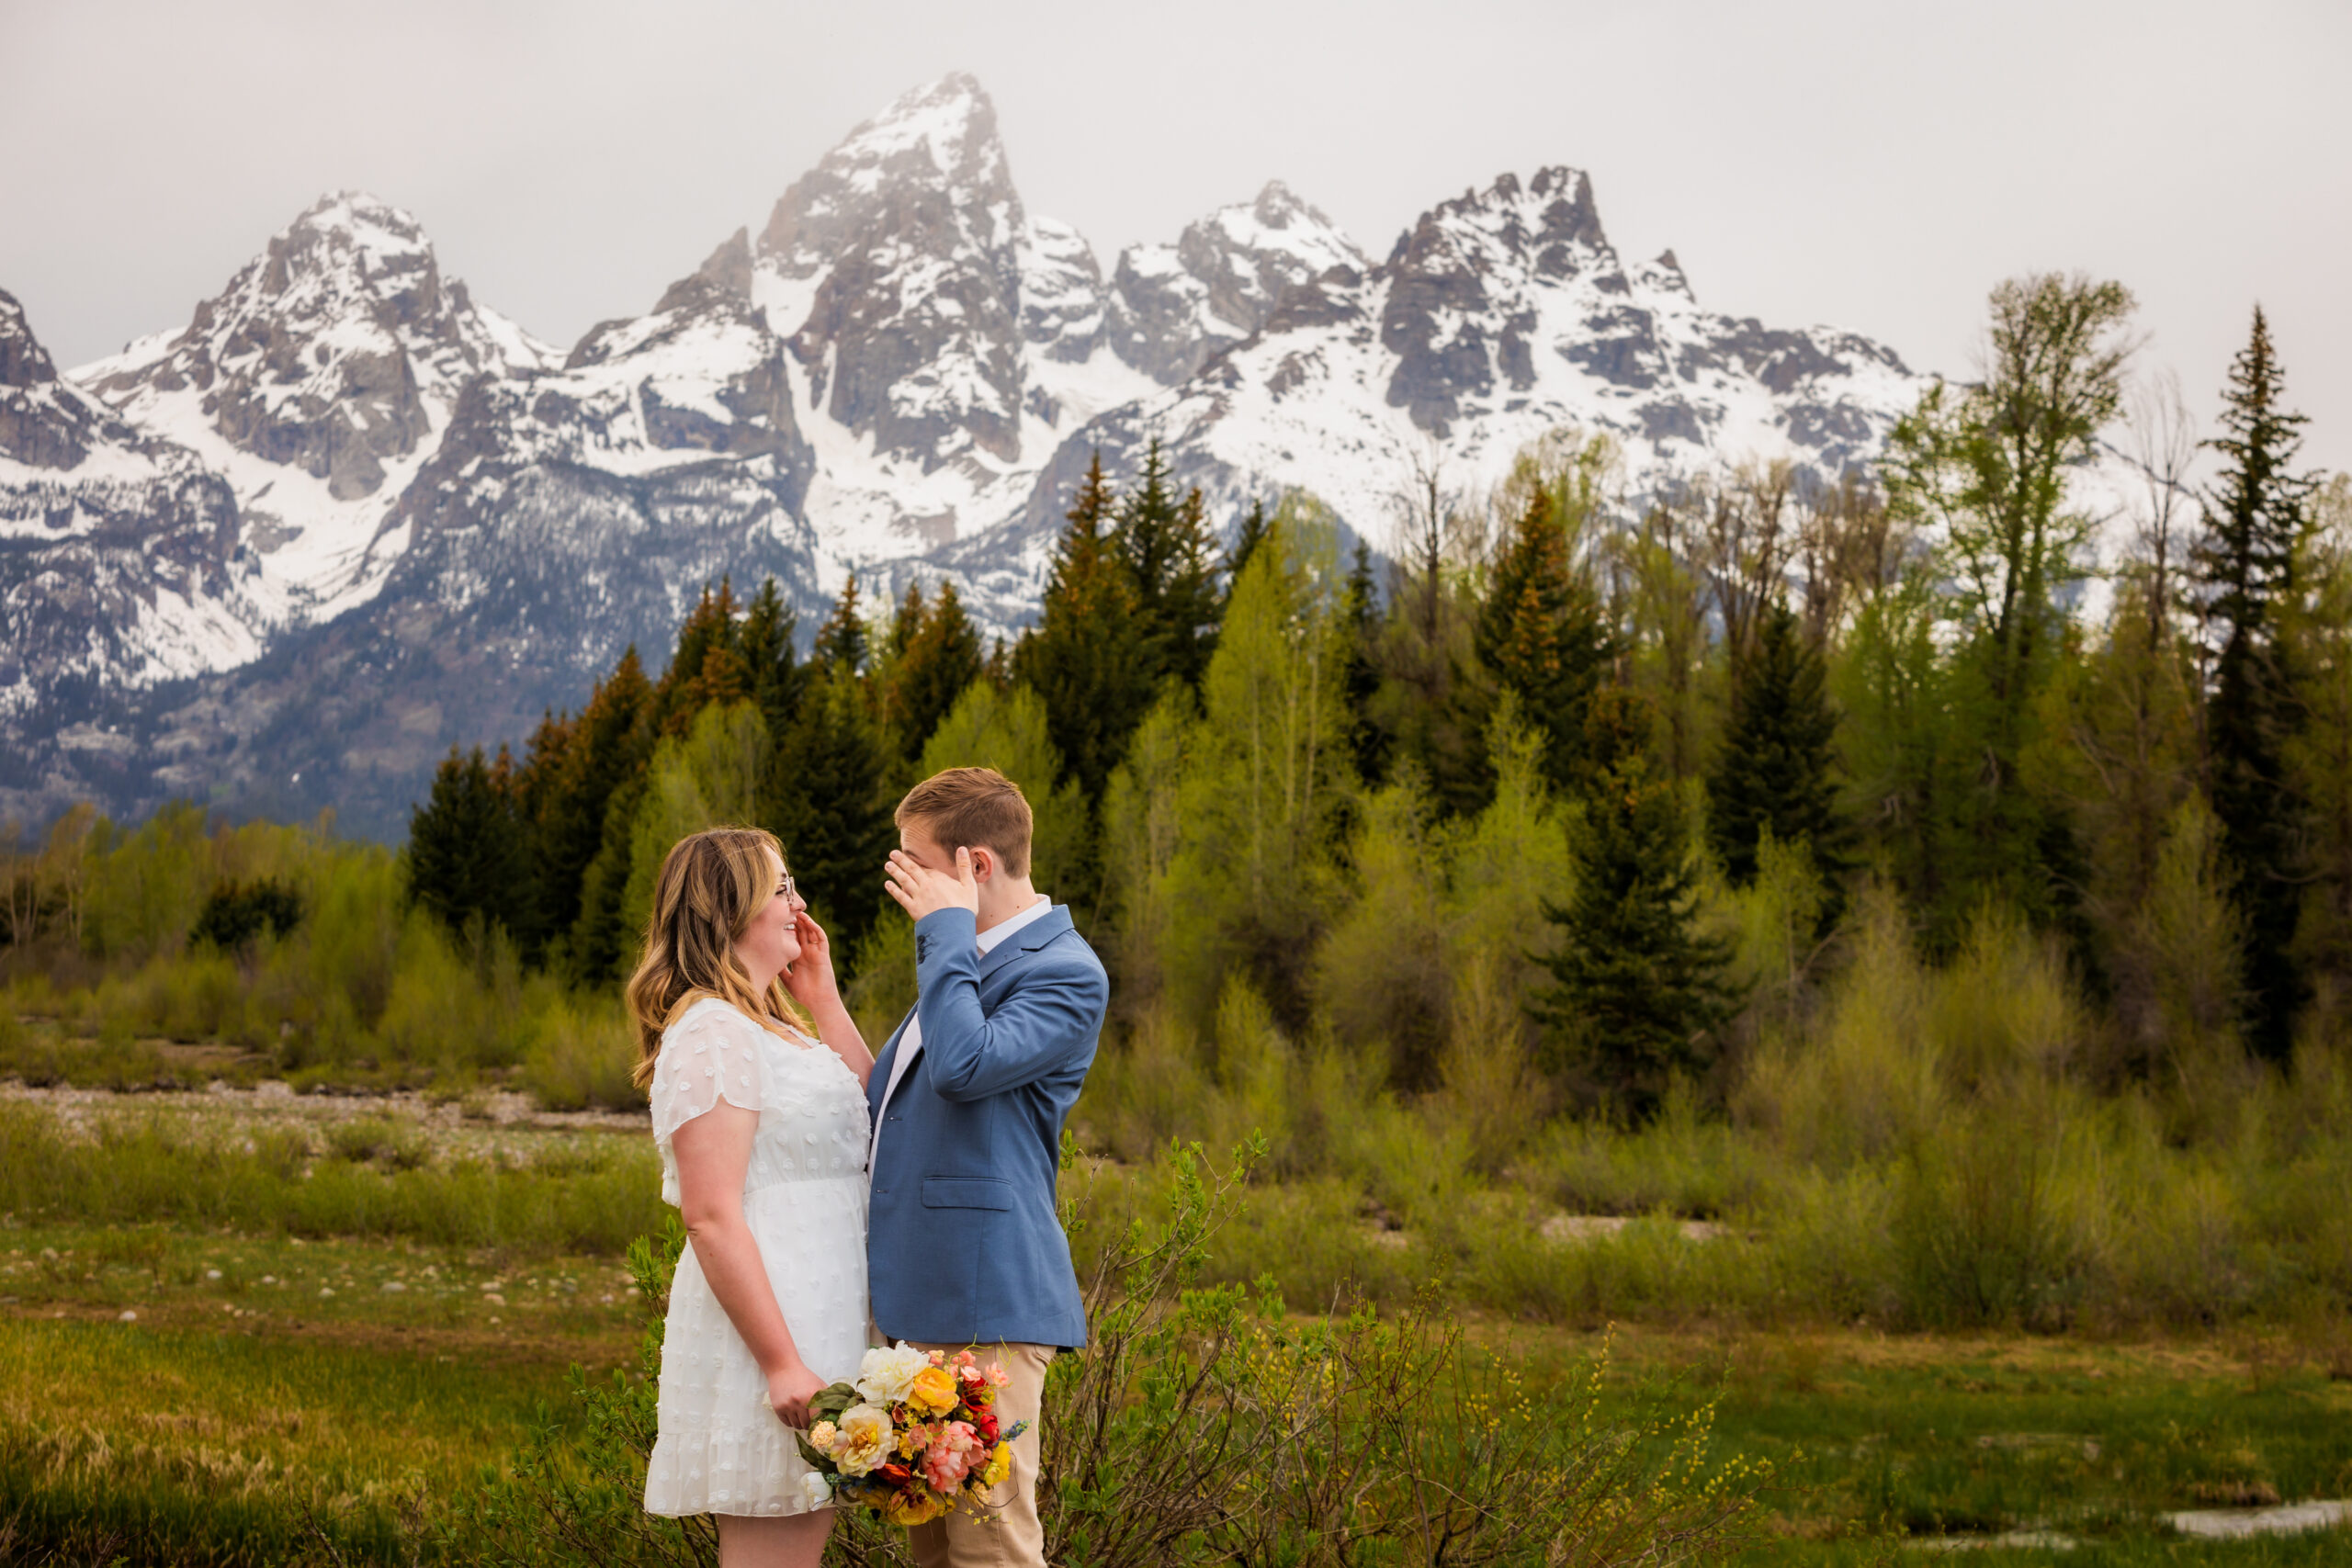 Emotional elopement bride and groom cry as they give their vows that leads to giggling. The tetons are snow capped and majestic.